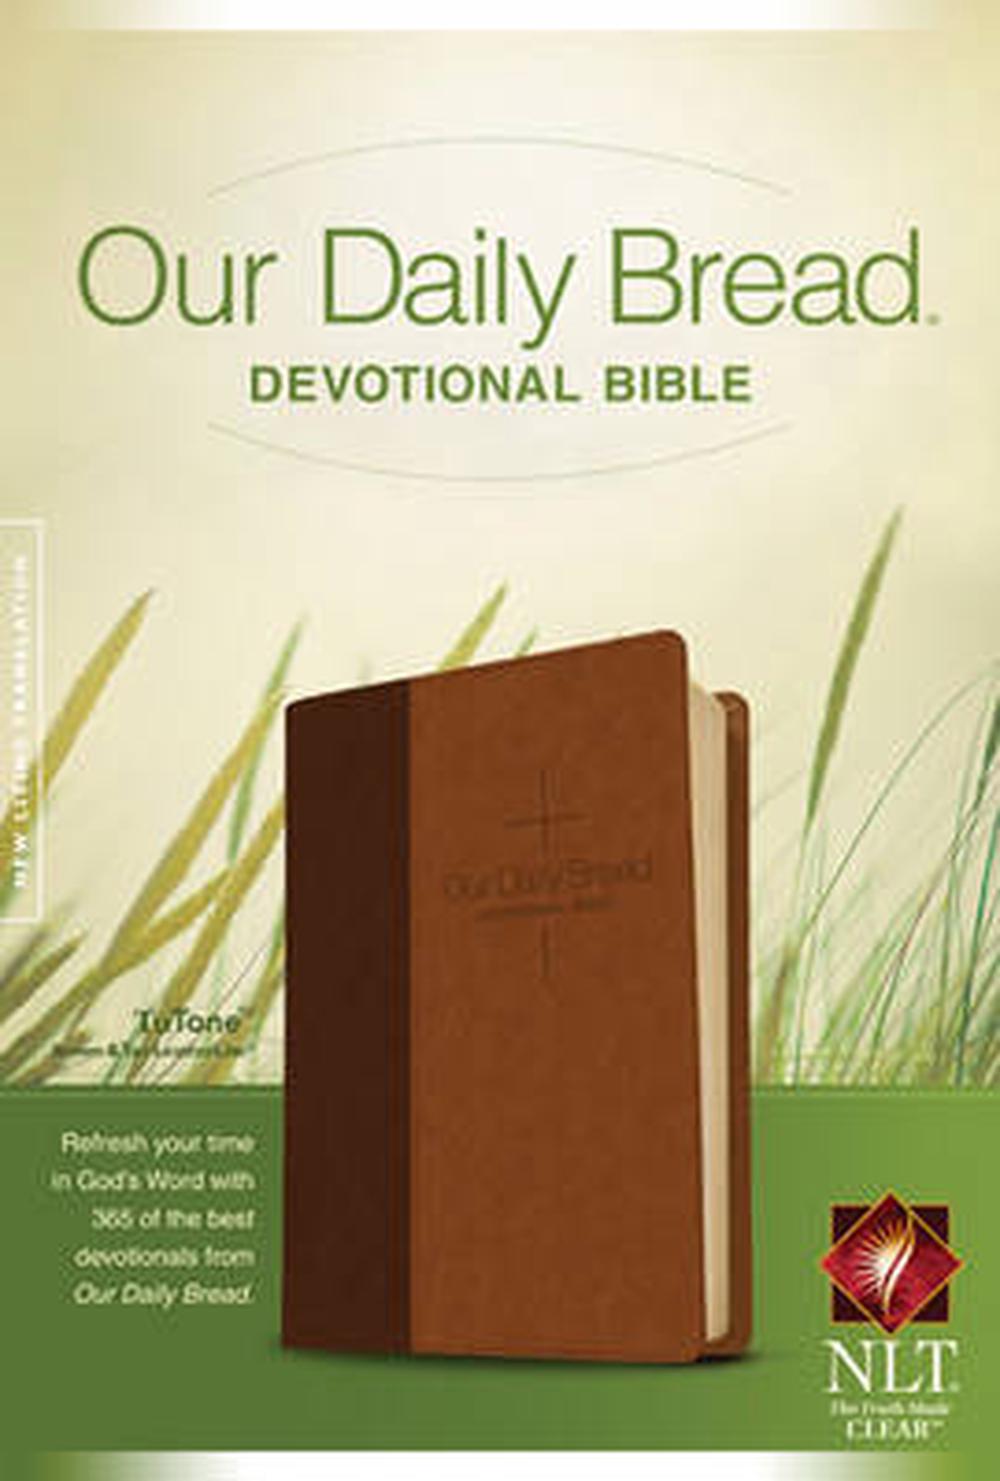 Our Daily Bread Devotional BibleNLT (English) Imitation Leather Book